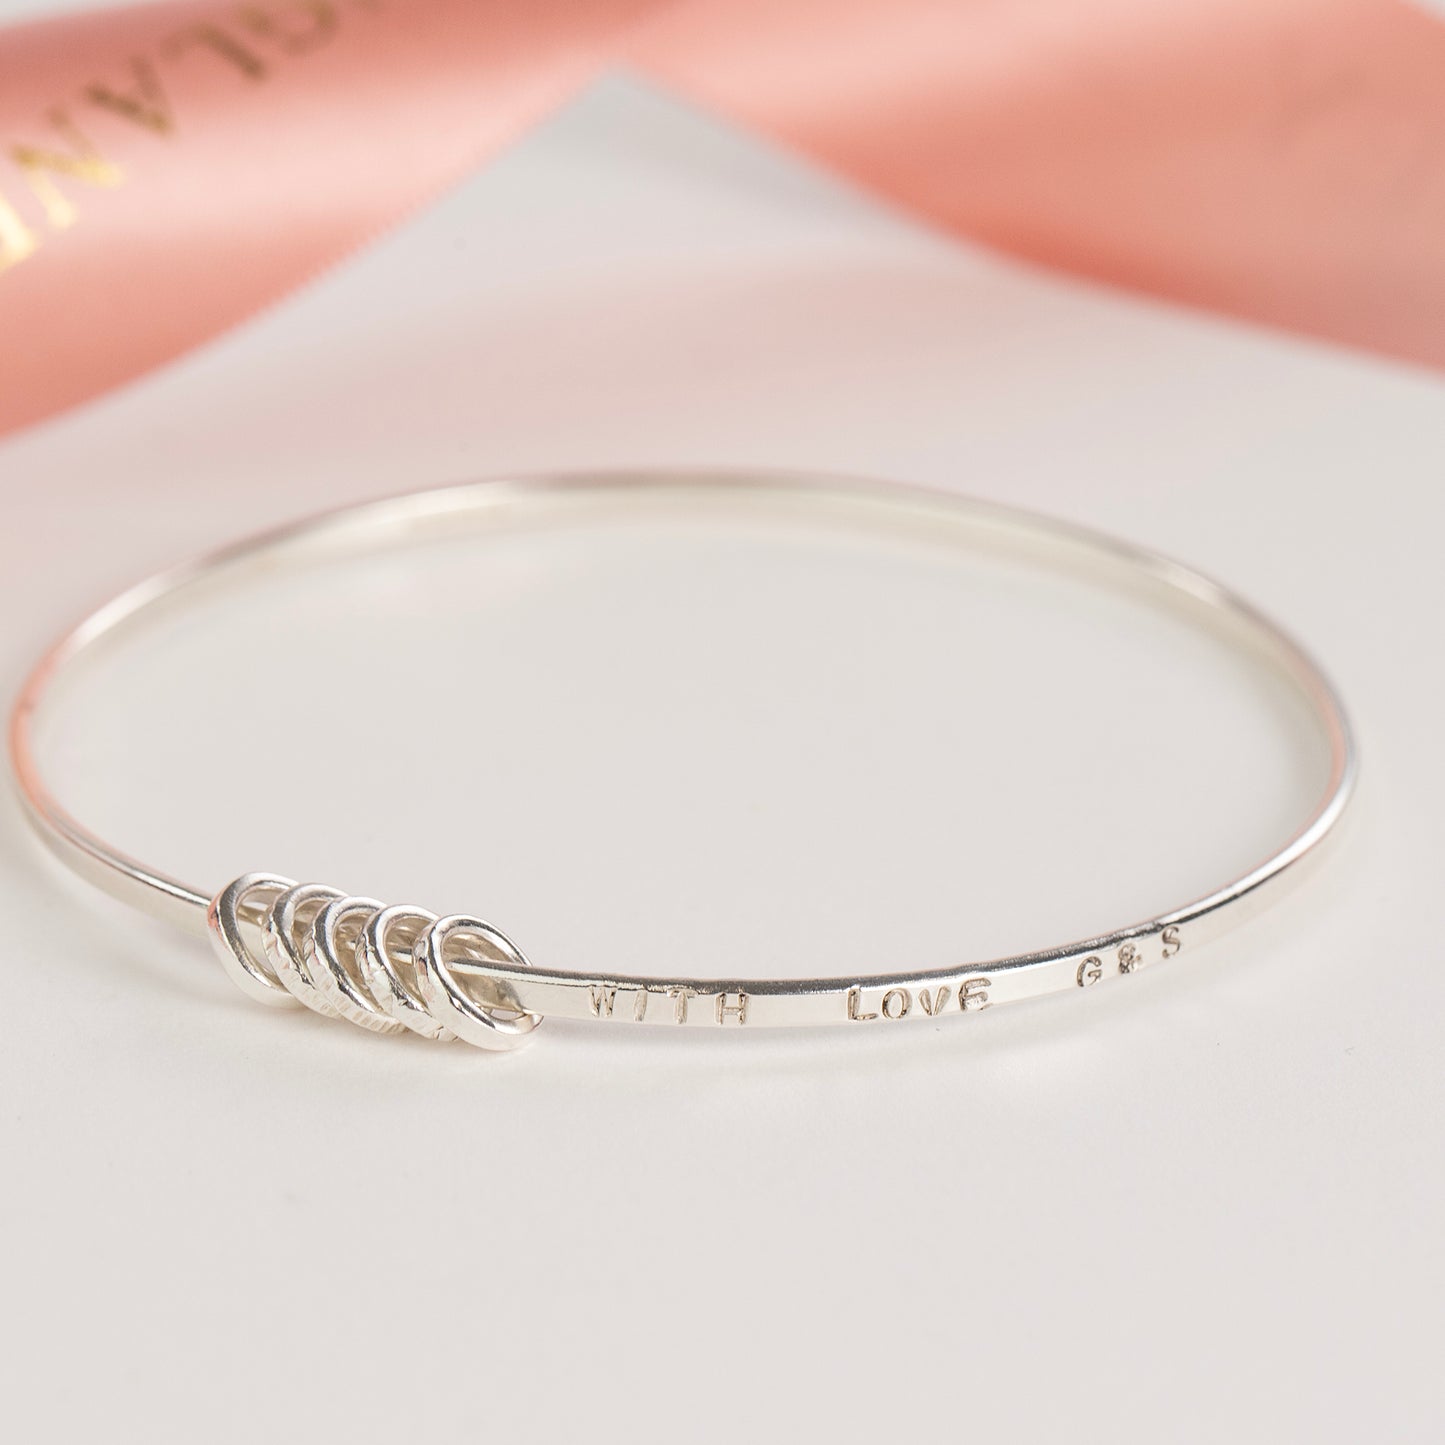 Personalised 50th Birthday Bangle - 5 Links for 5 Decades - Silver